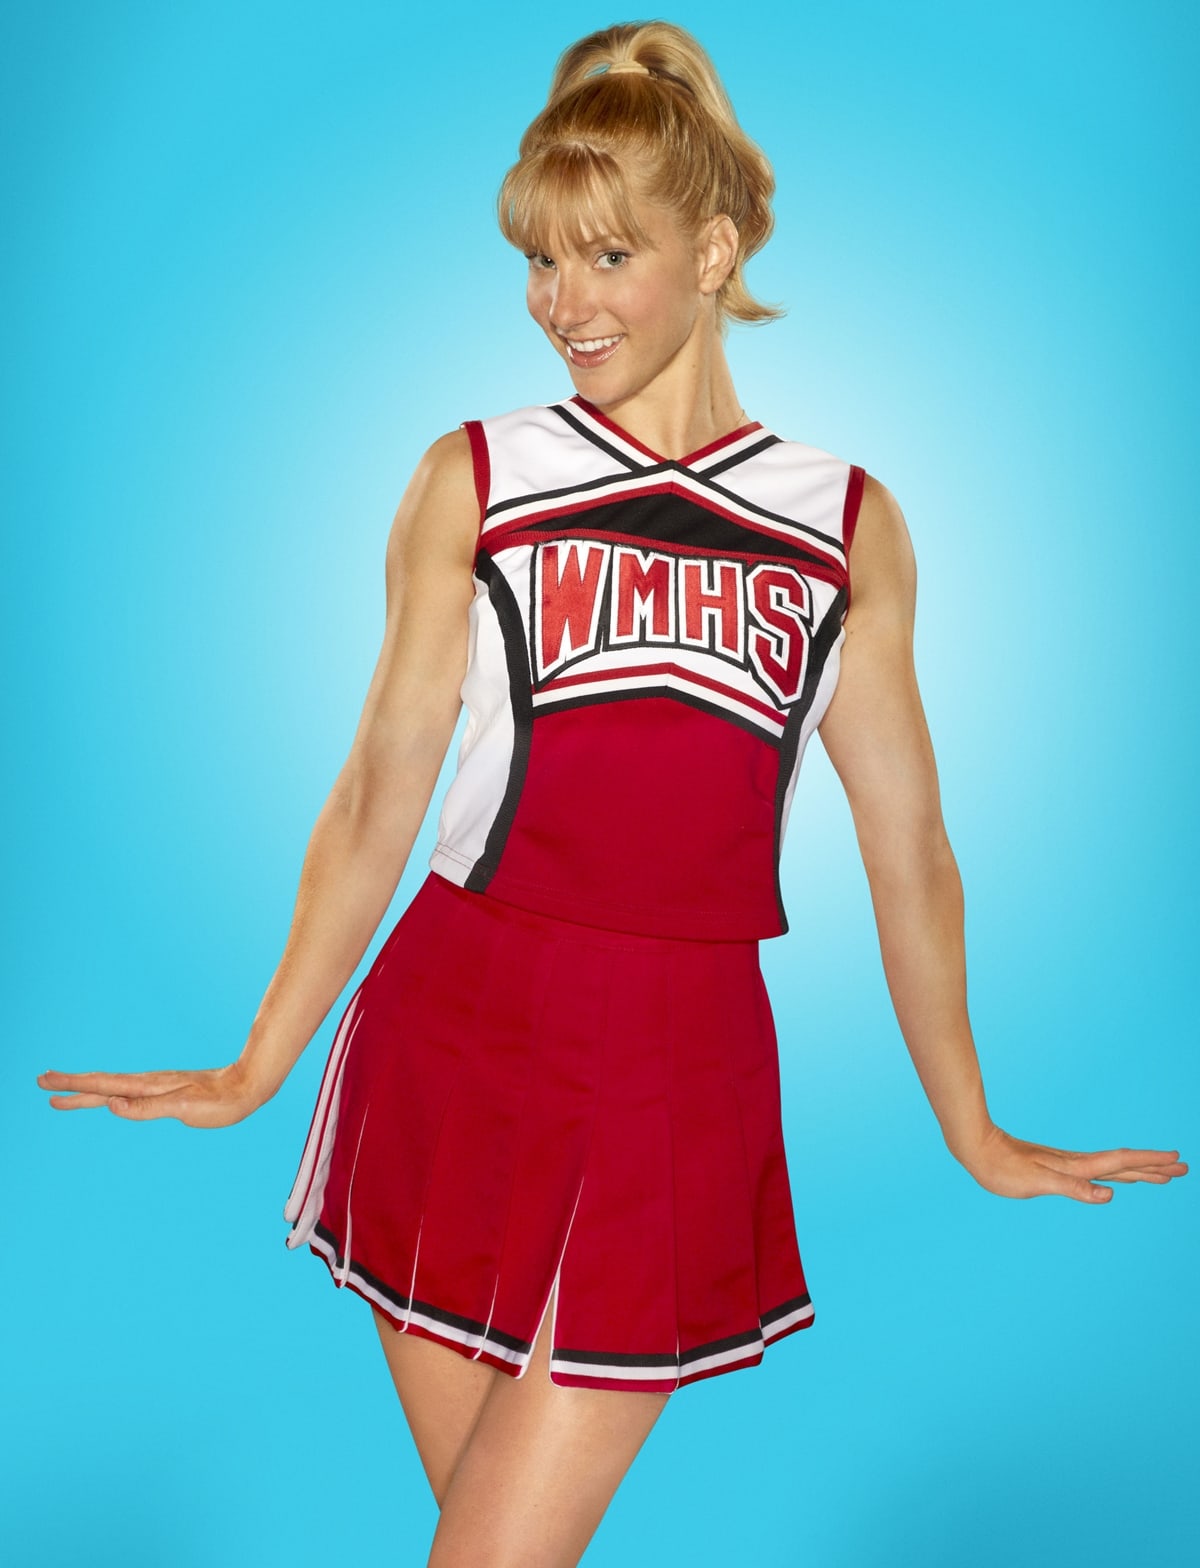 Heather Elizabeth Morris is best known for her portrayal of Brittany S. Pierce in the popular Fox musical comedy-drama series Glee